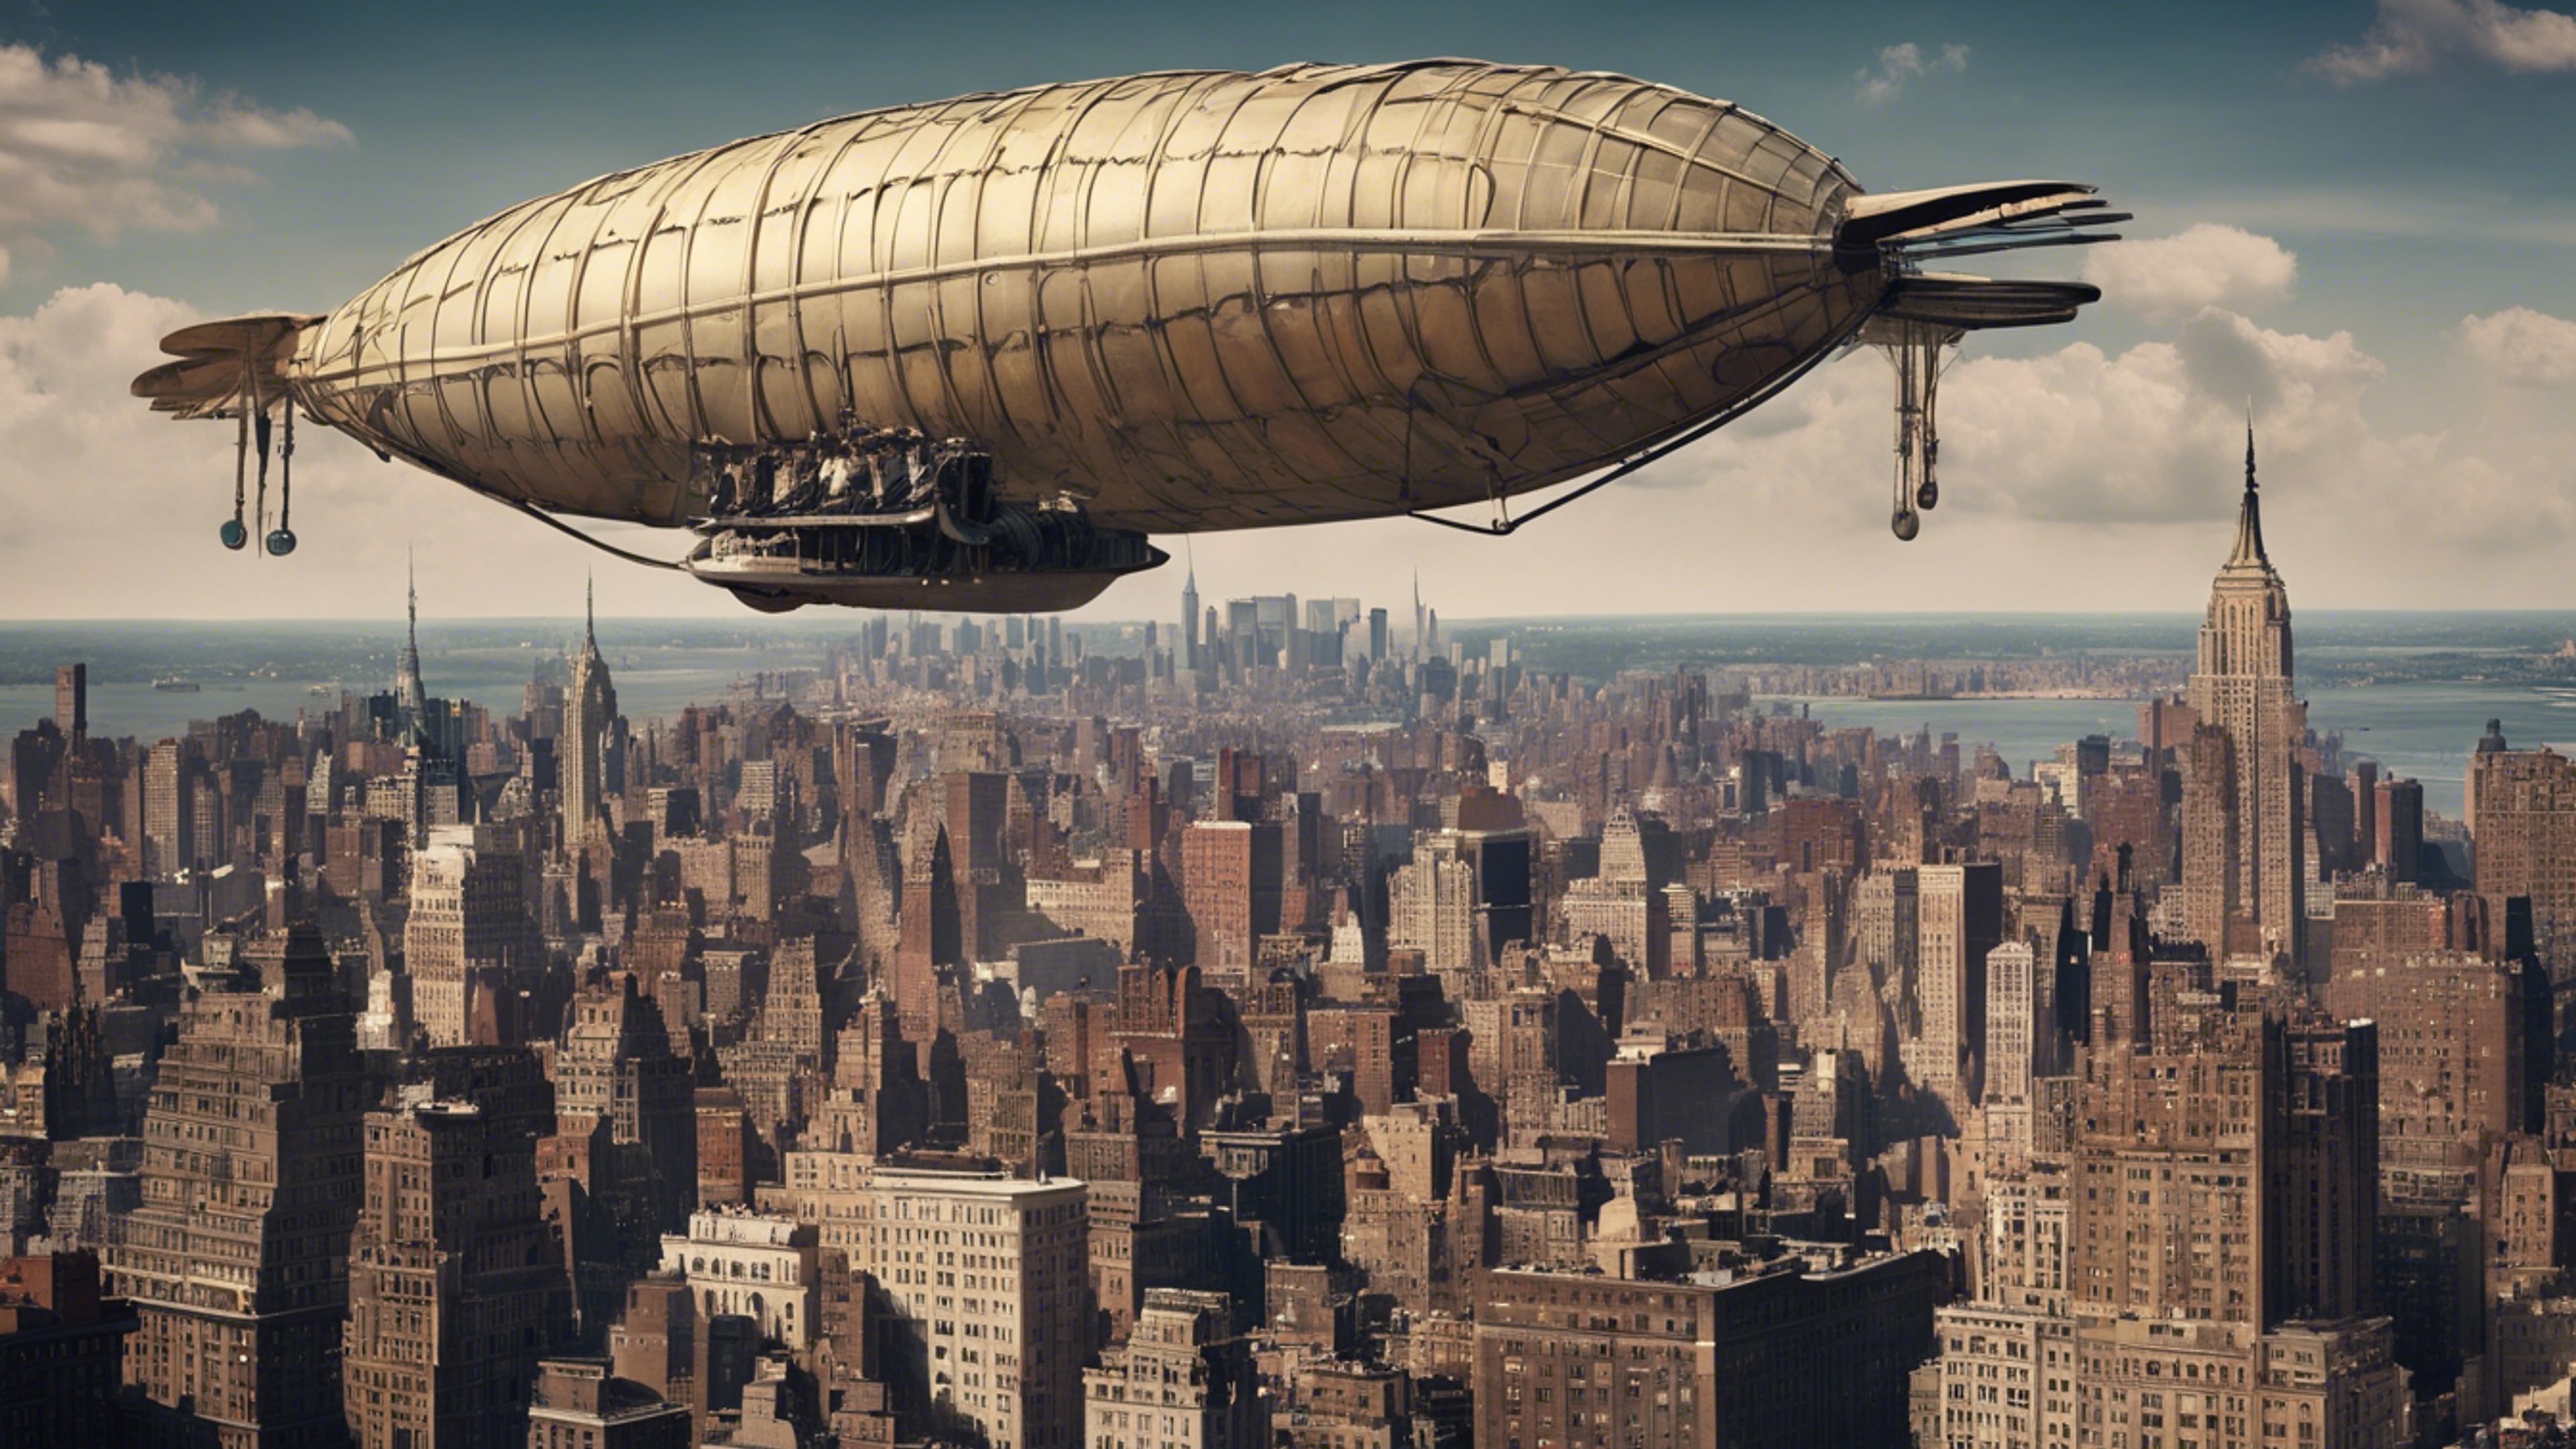 A nostalgic skyline view of 1920s New York City, peppered with zeppelins. Tapeta[5c42609b28fb4c129601]